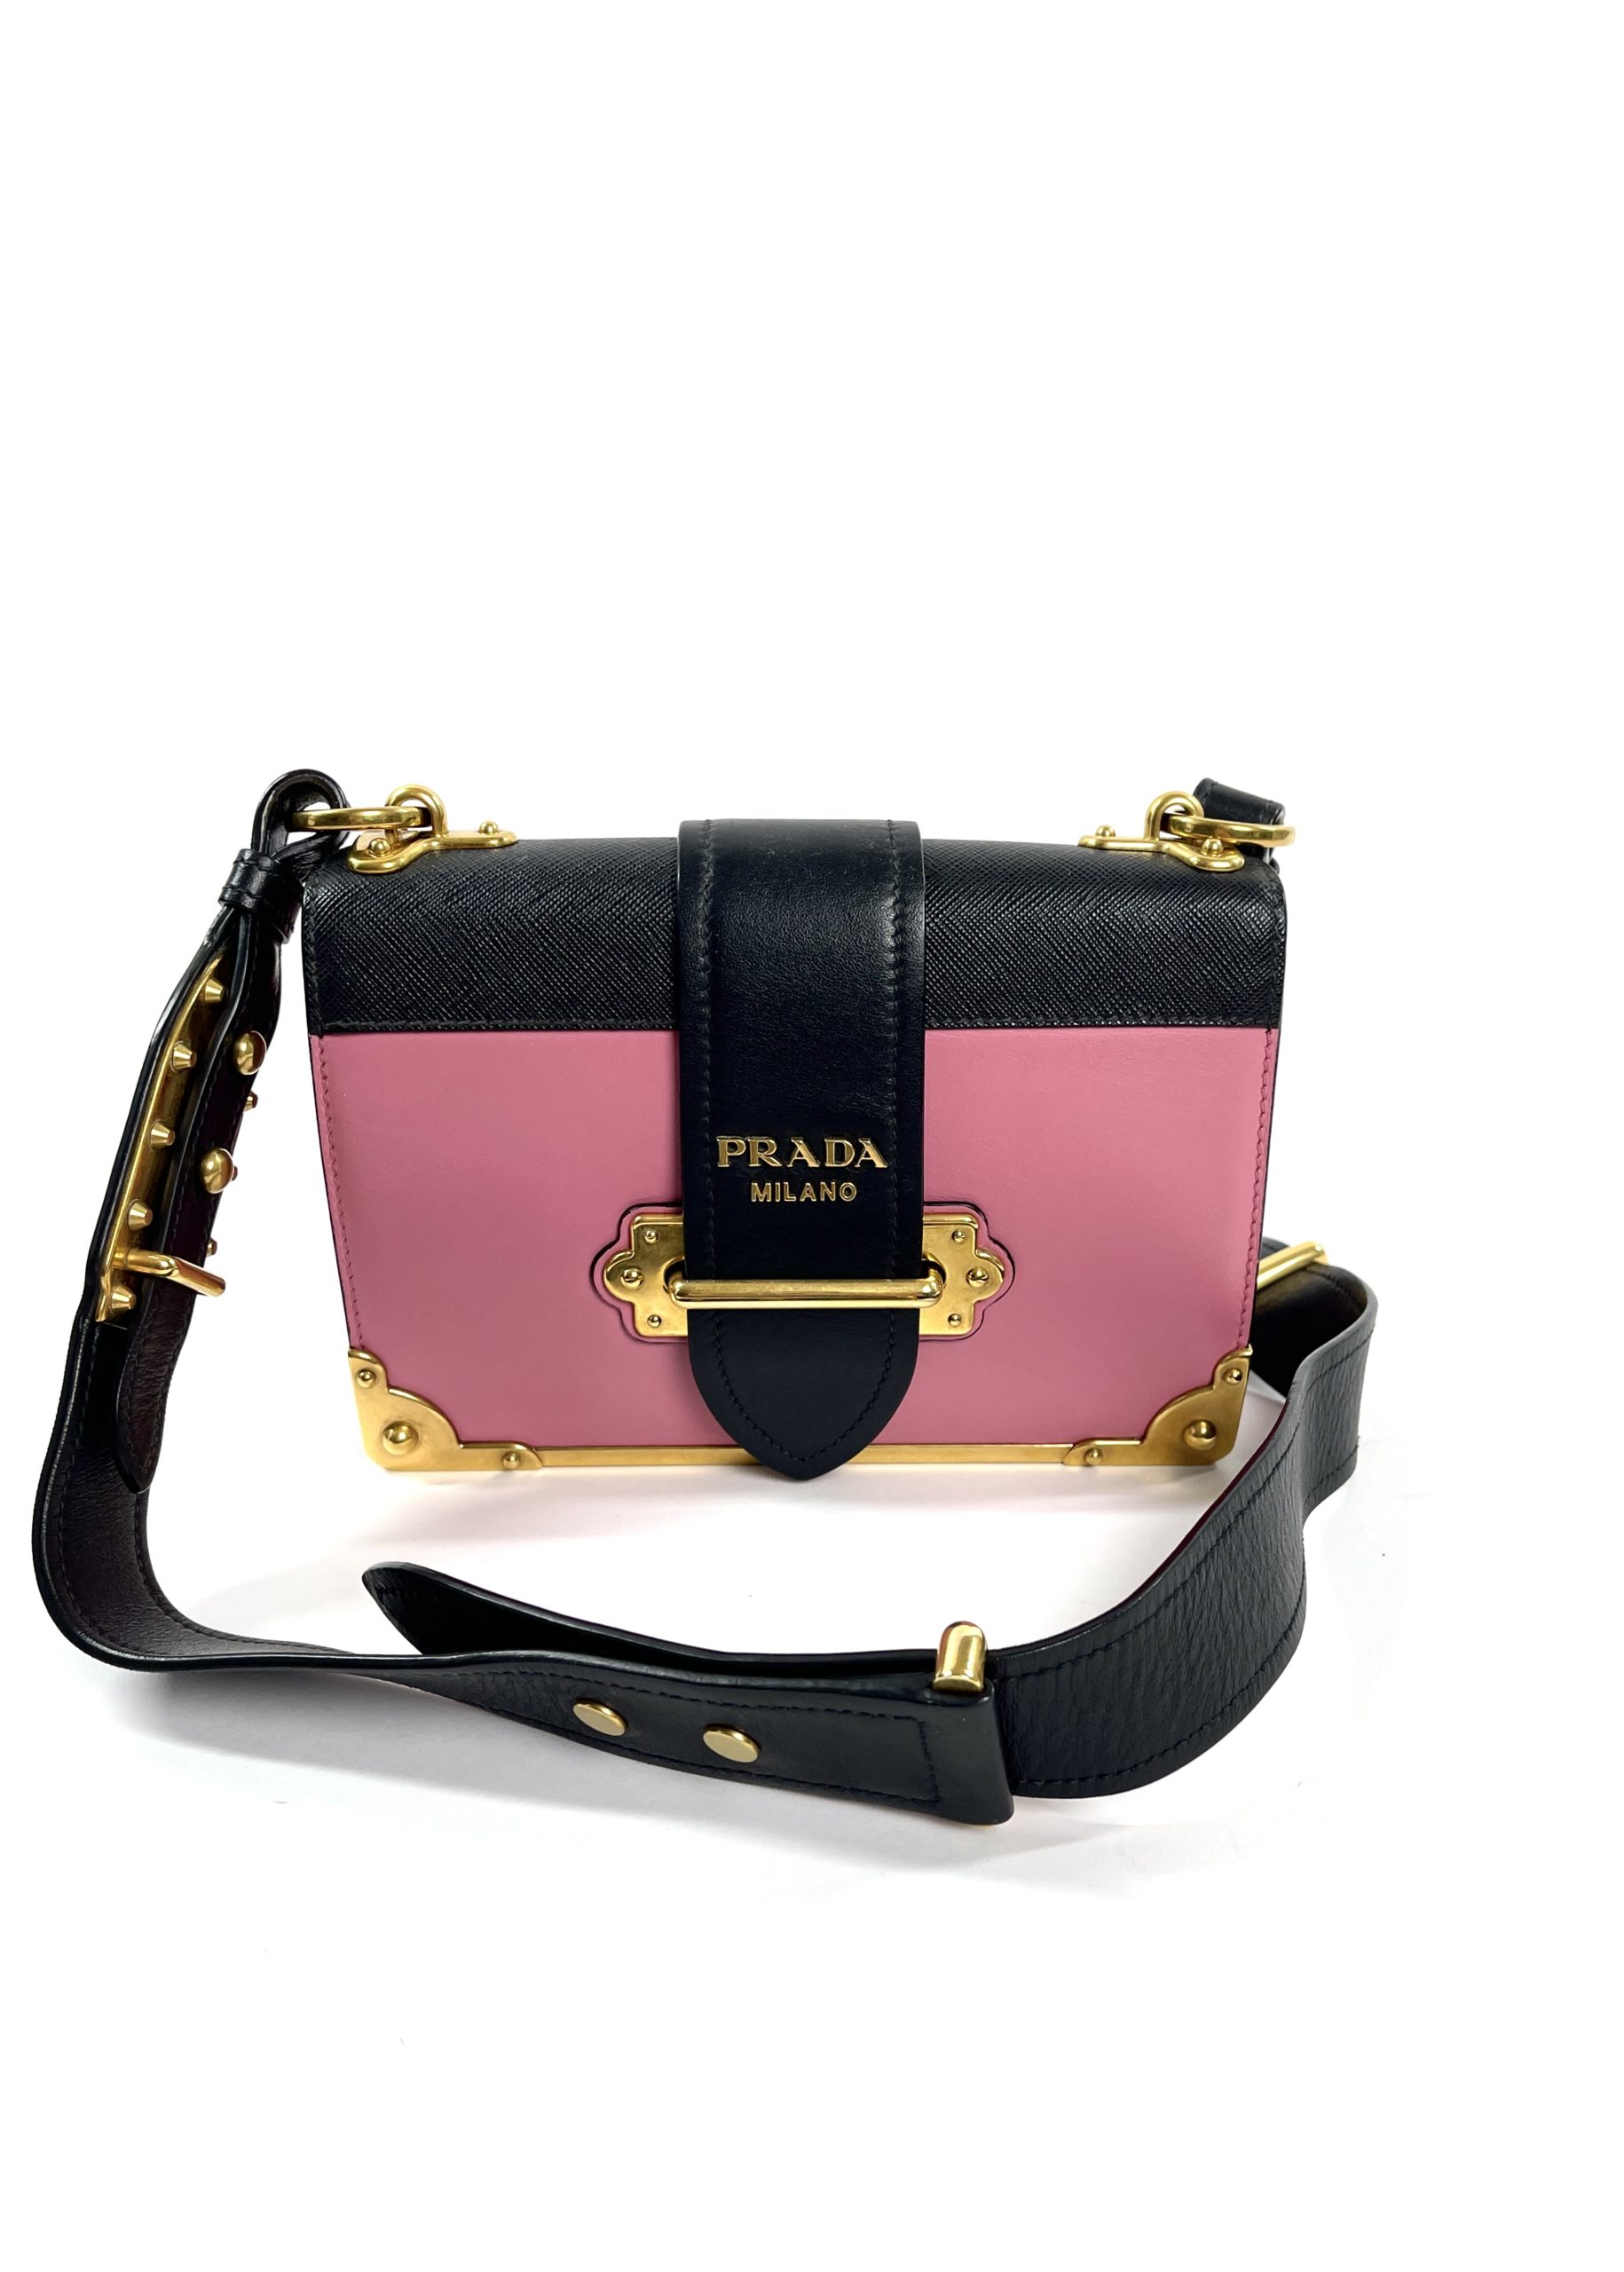 The Prada Cahier Bag Is The New IT-Bag